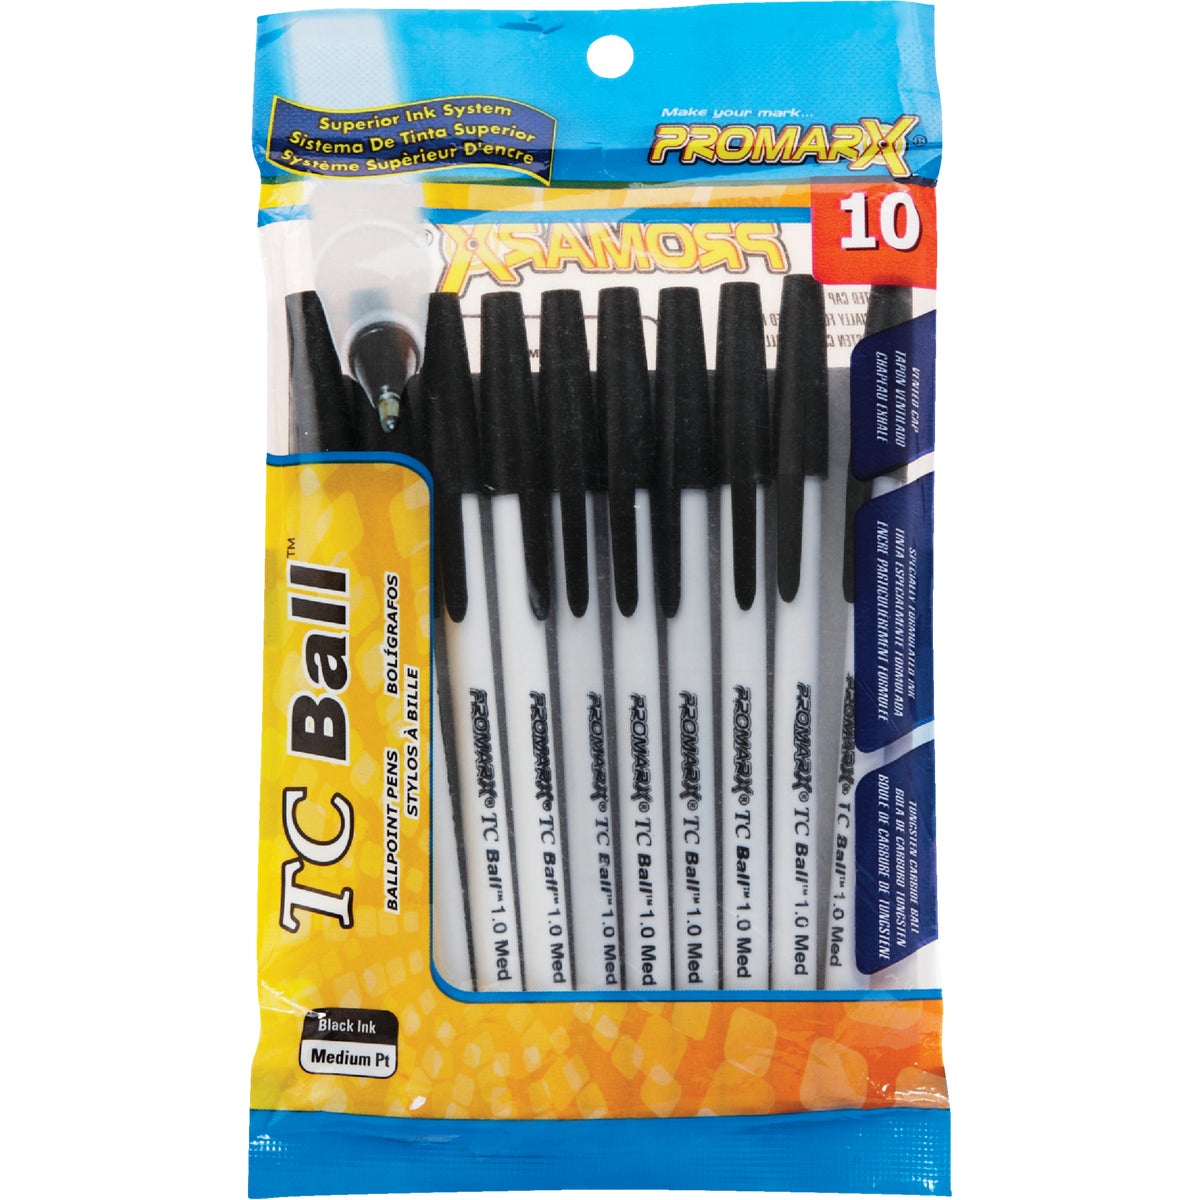 Item 970207, TC ProMarx ballpoint pens feature a superior ink system, stainless steel 